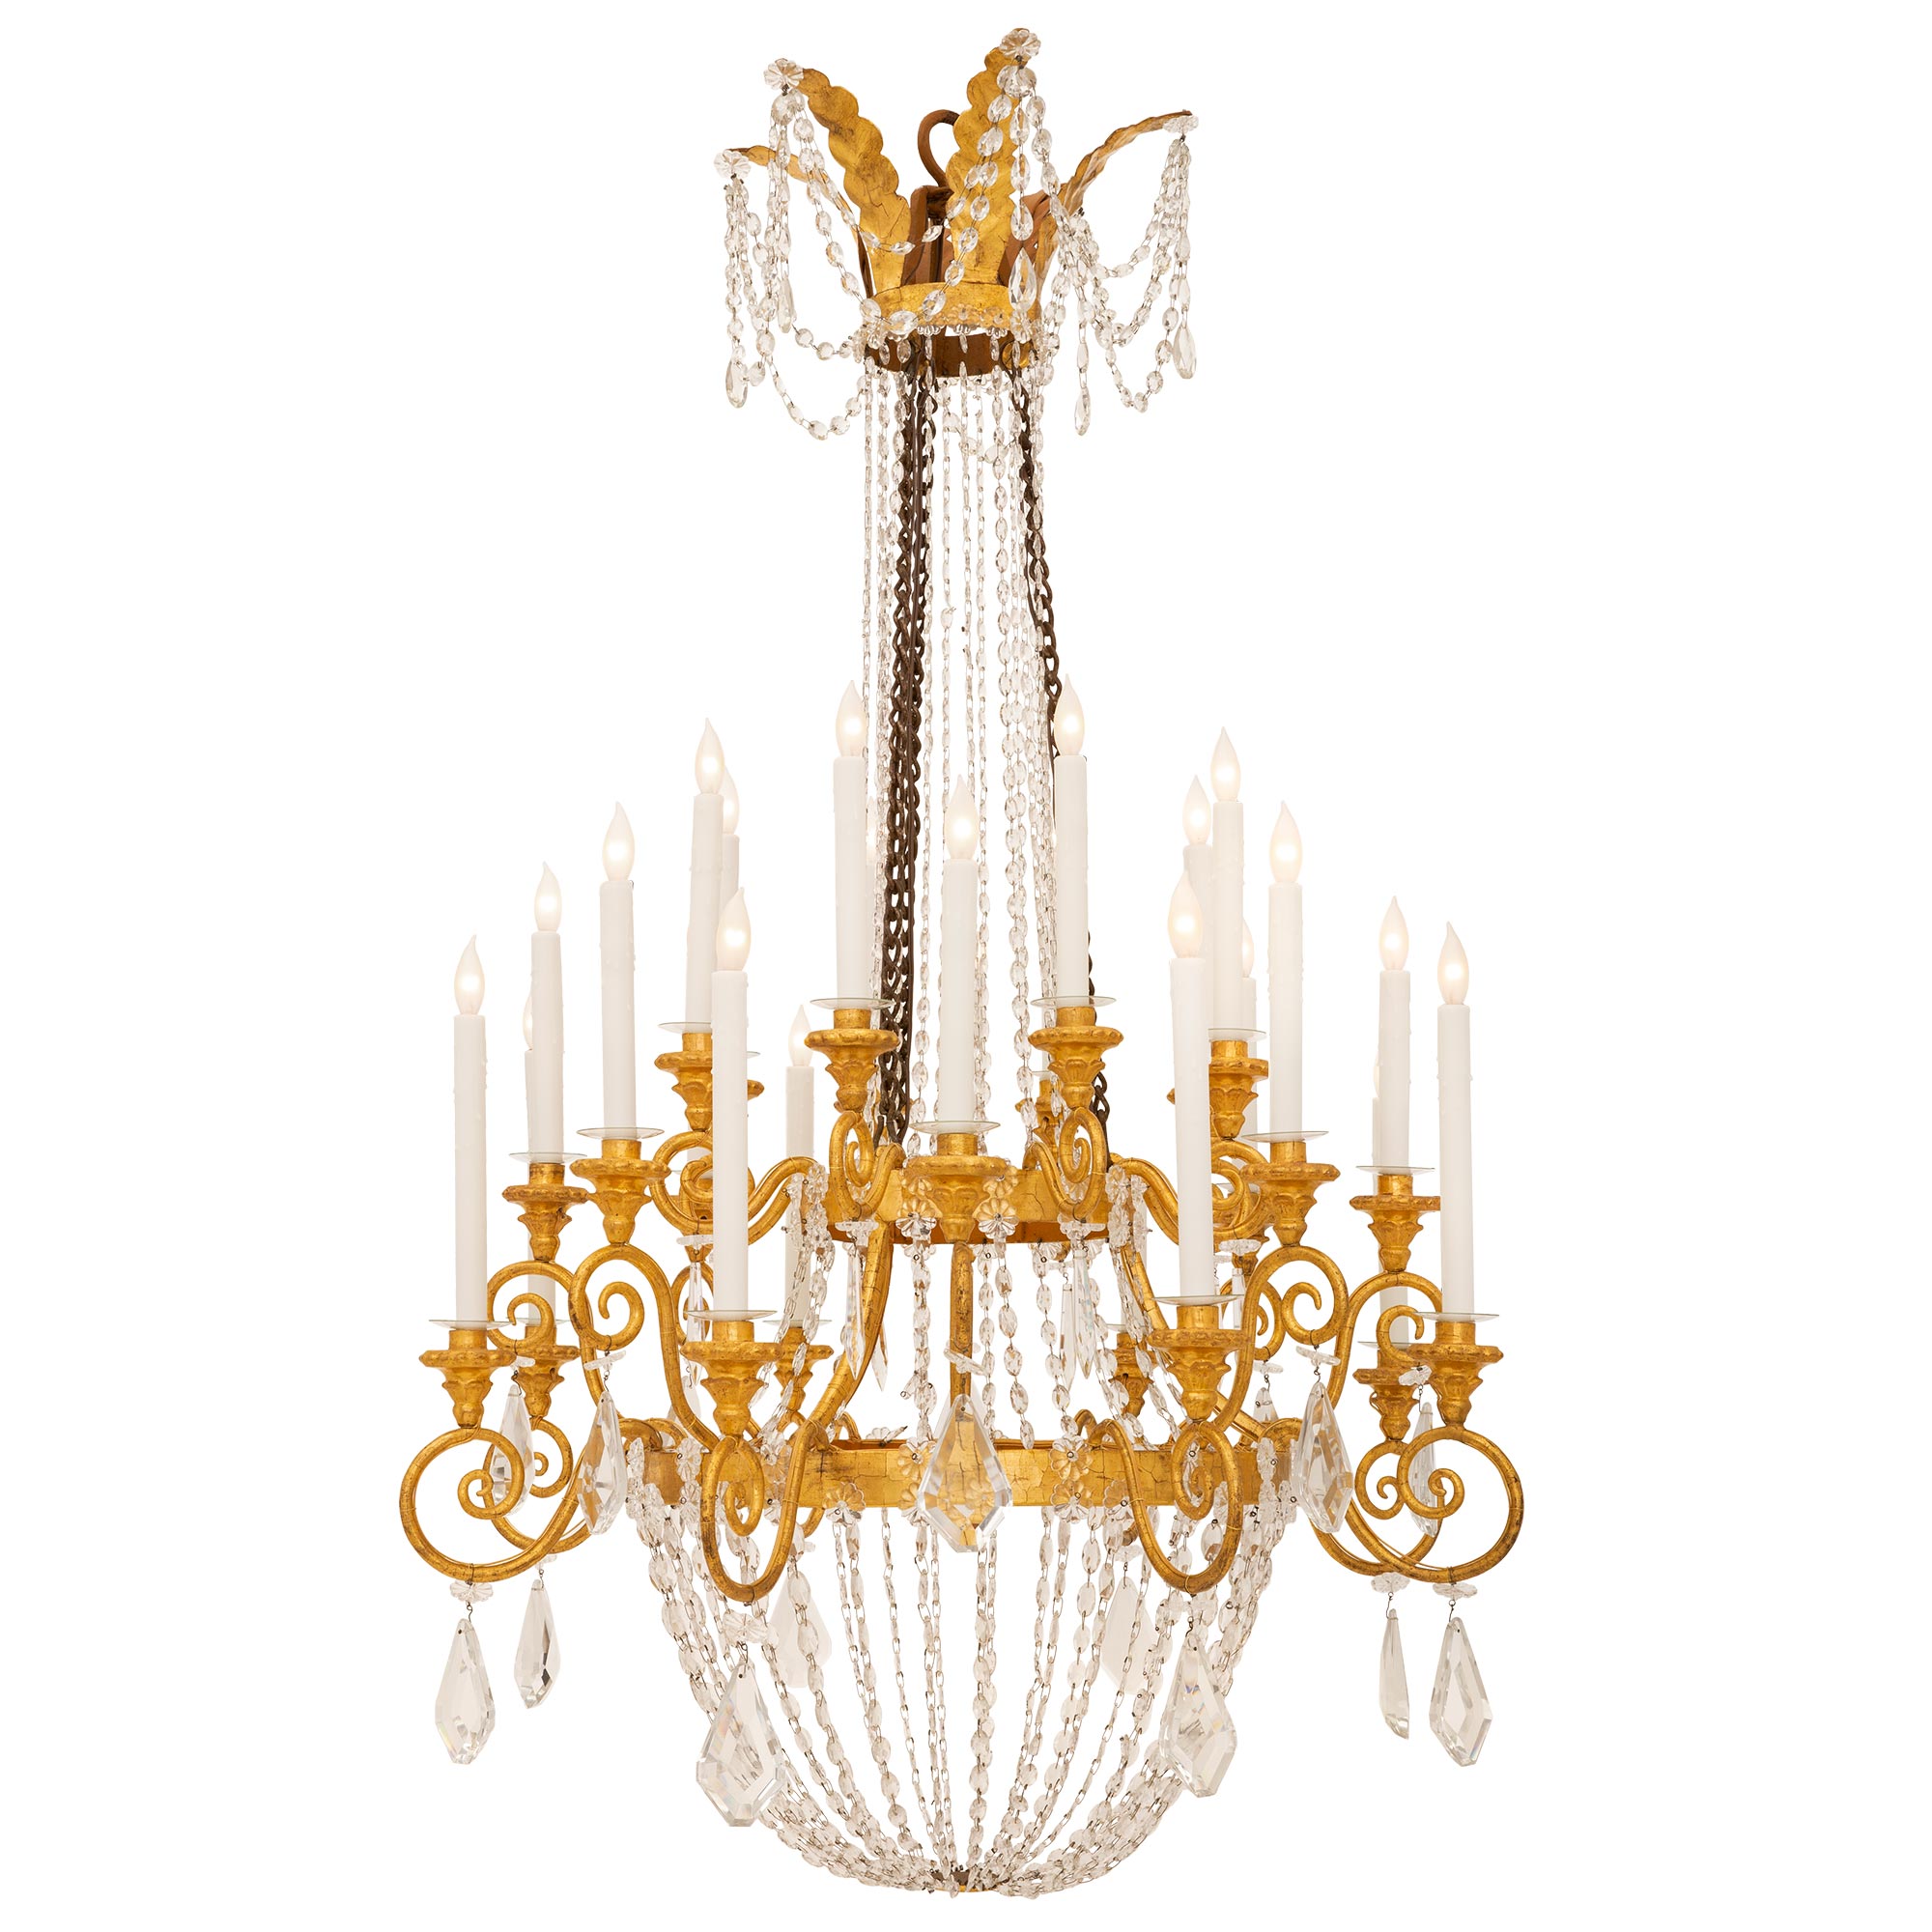 Italian 19th Century Neo-Classical St. Crystal, Giltwood & Iron Chandelier  For Sale